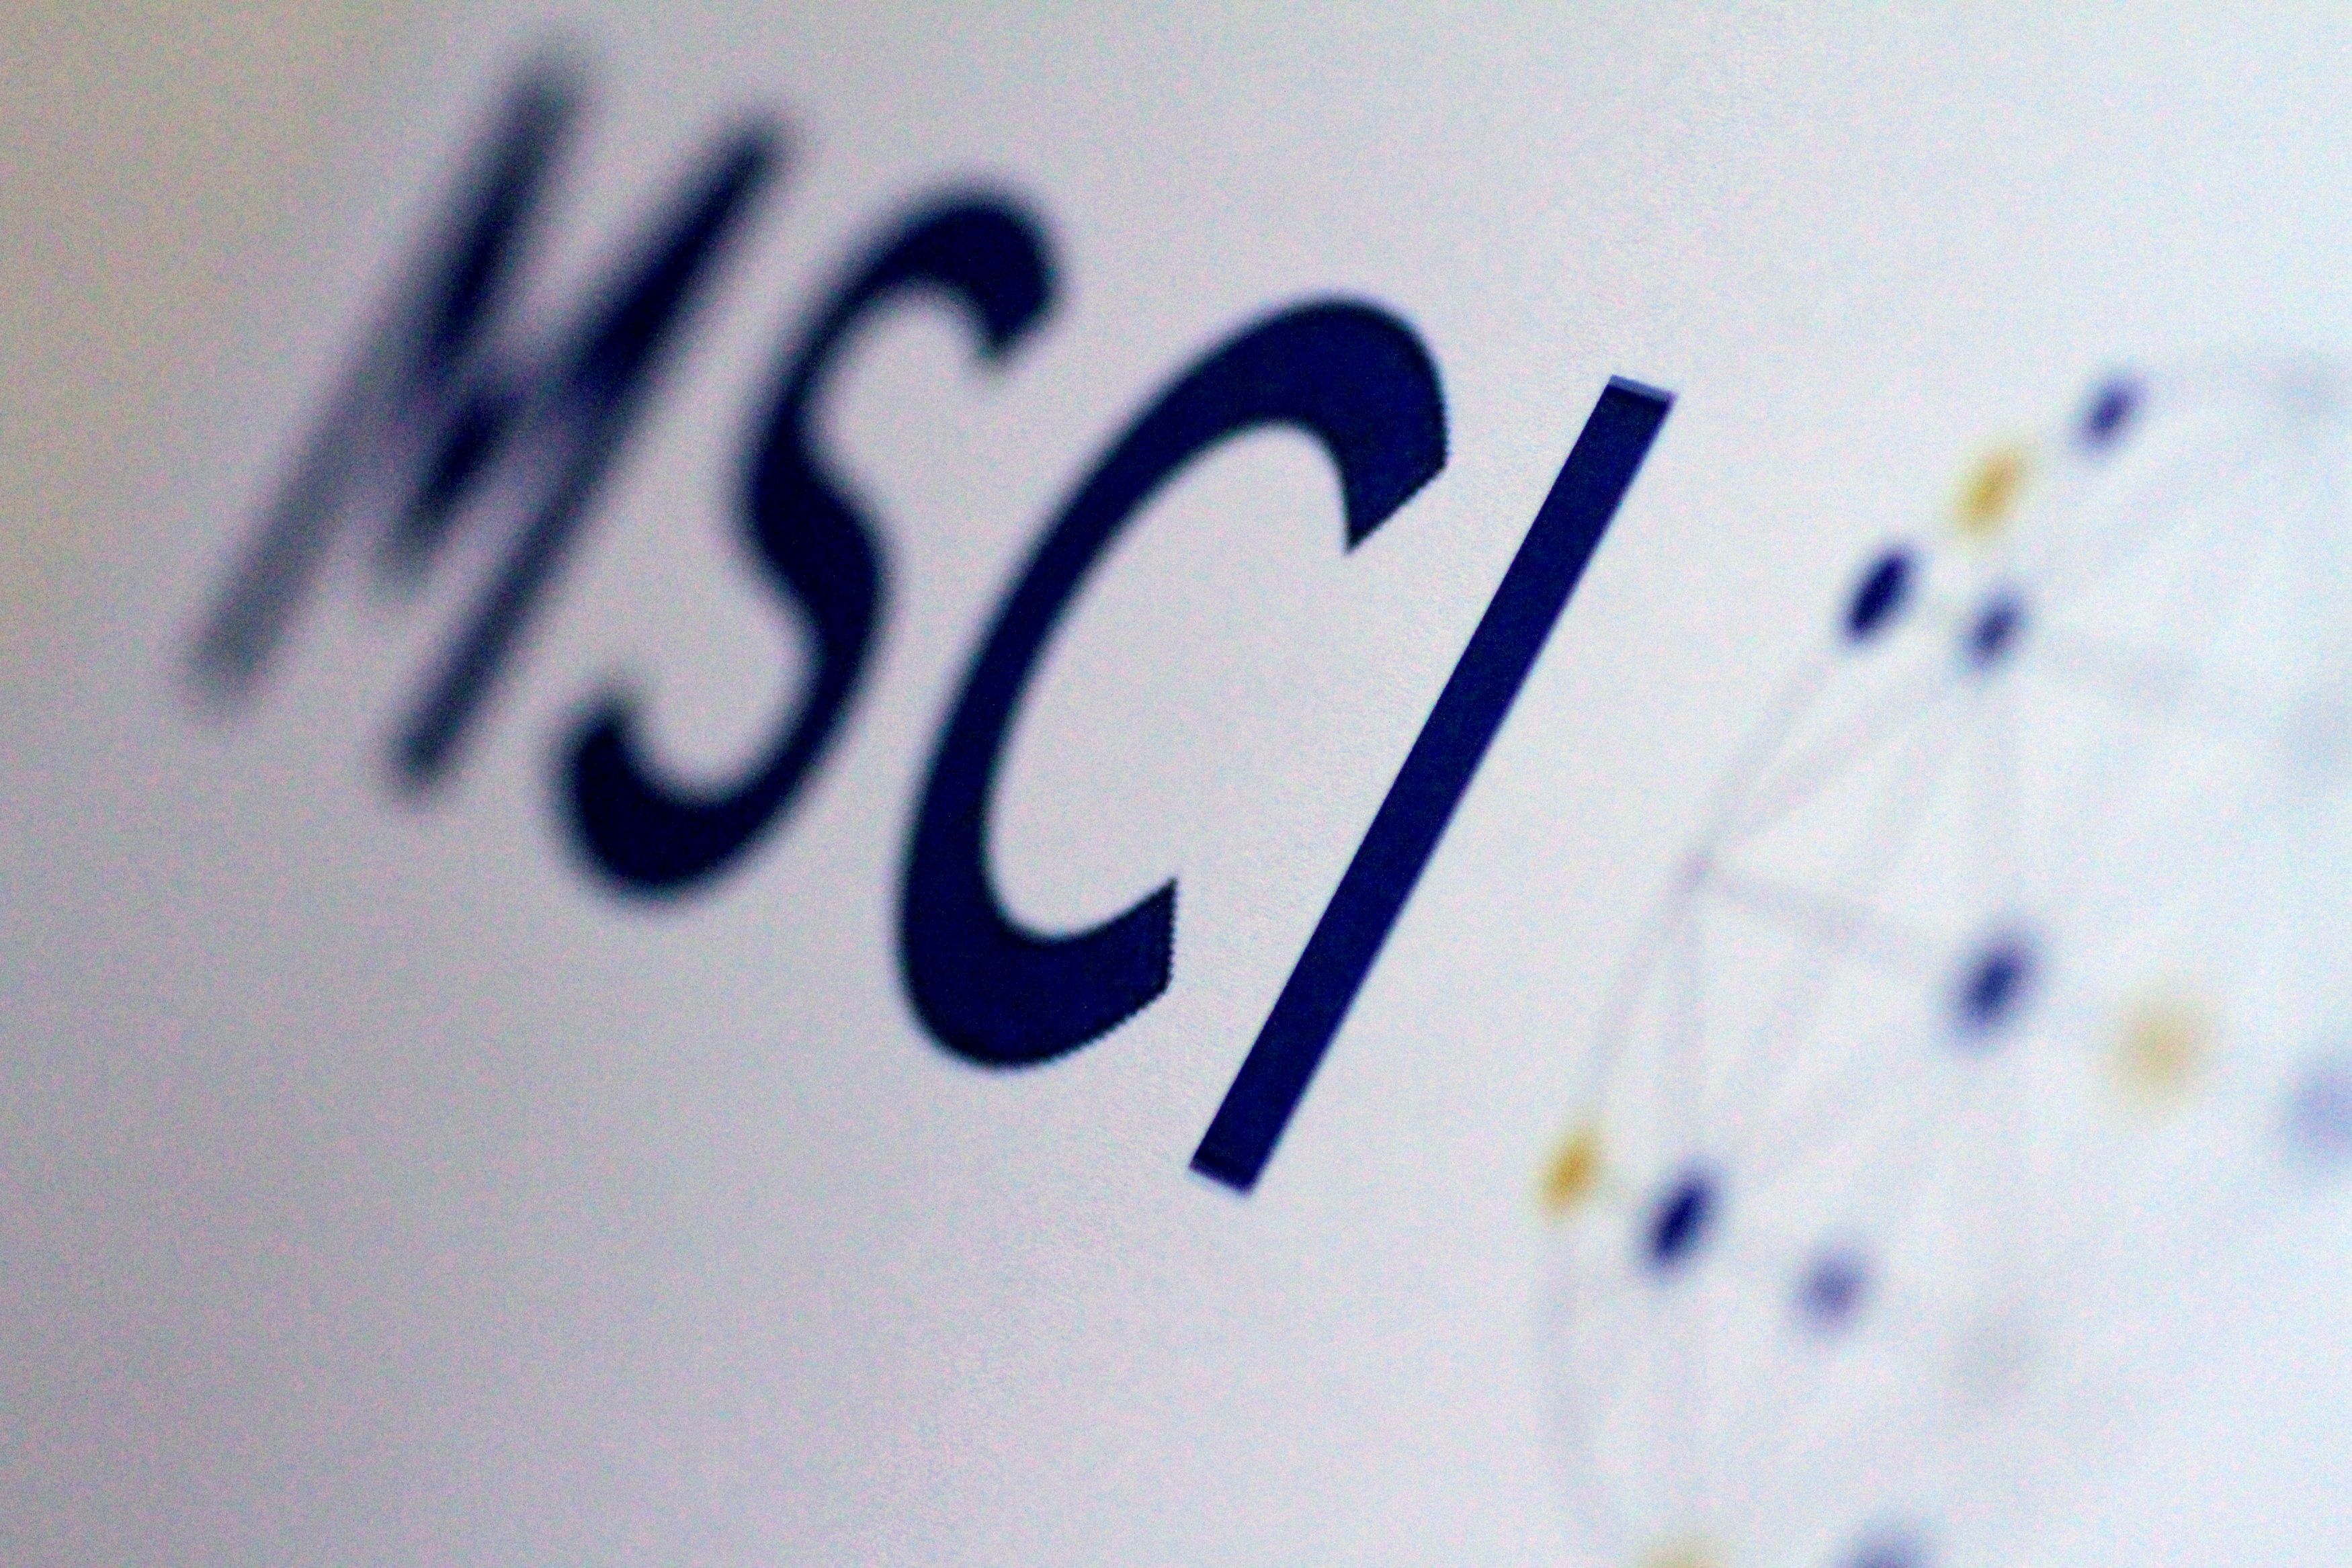 The MSCI logo is seen in this June 20, 2017 illustration photo. REUTERS/Thomas White/Illustration/File Photo